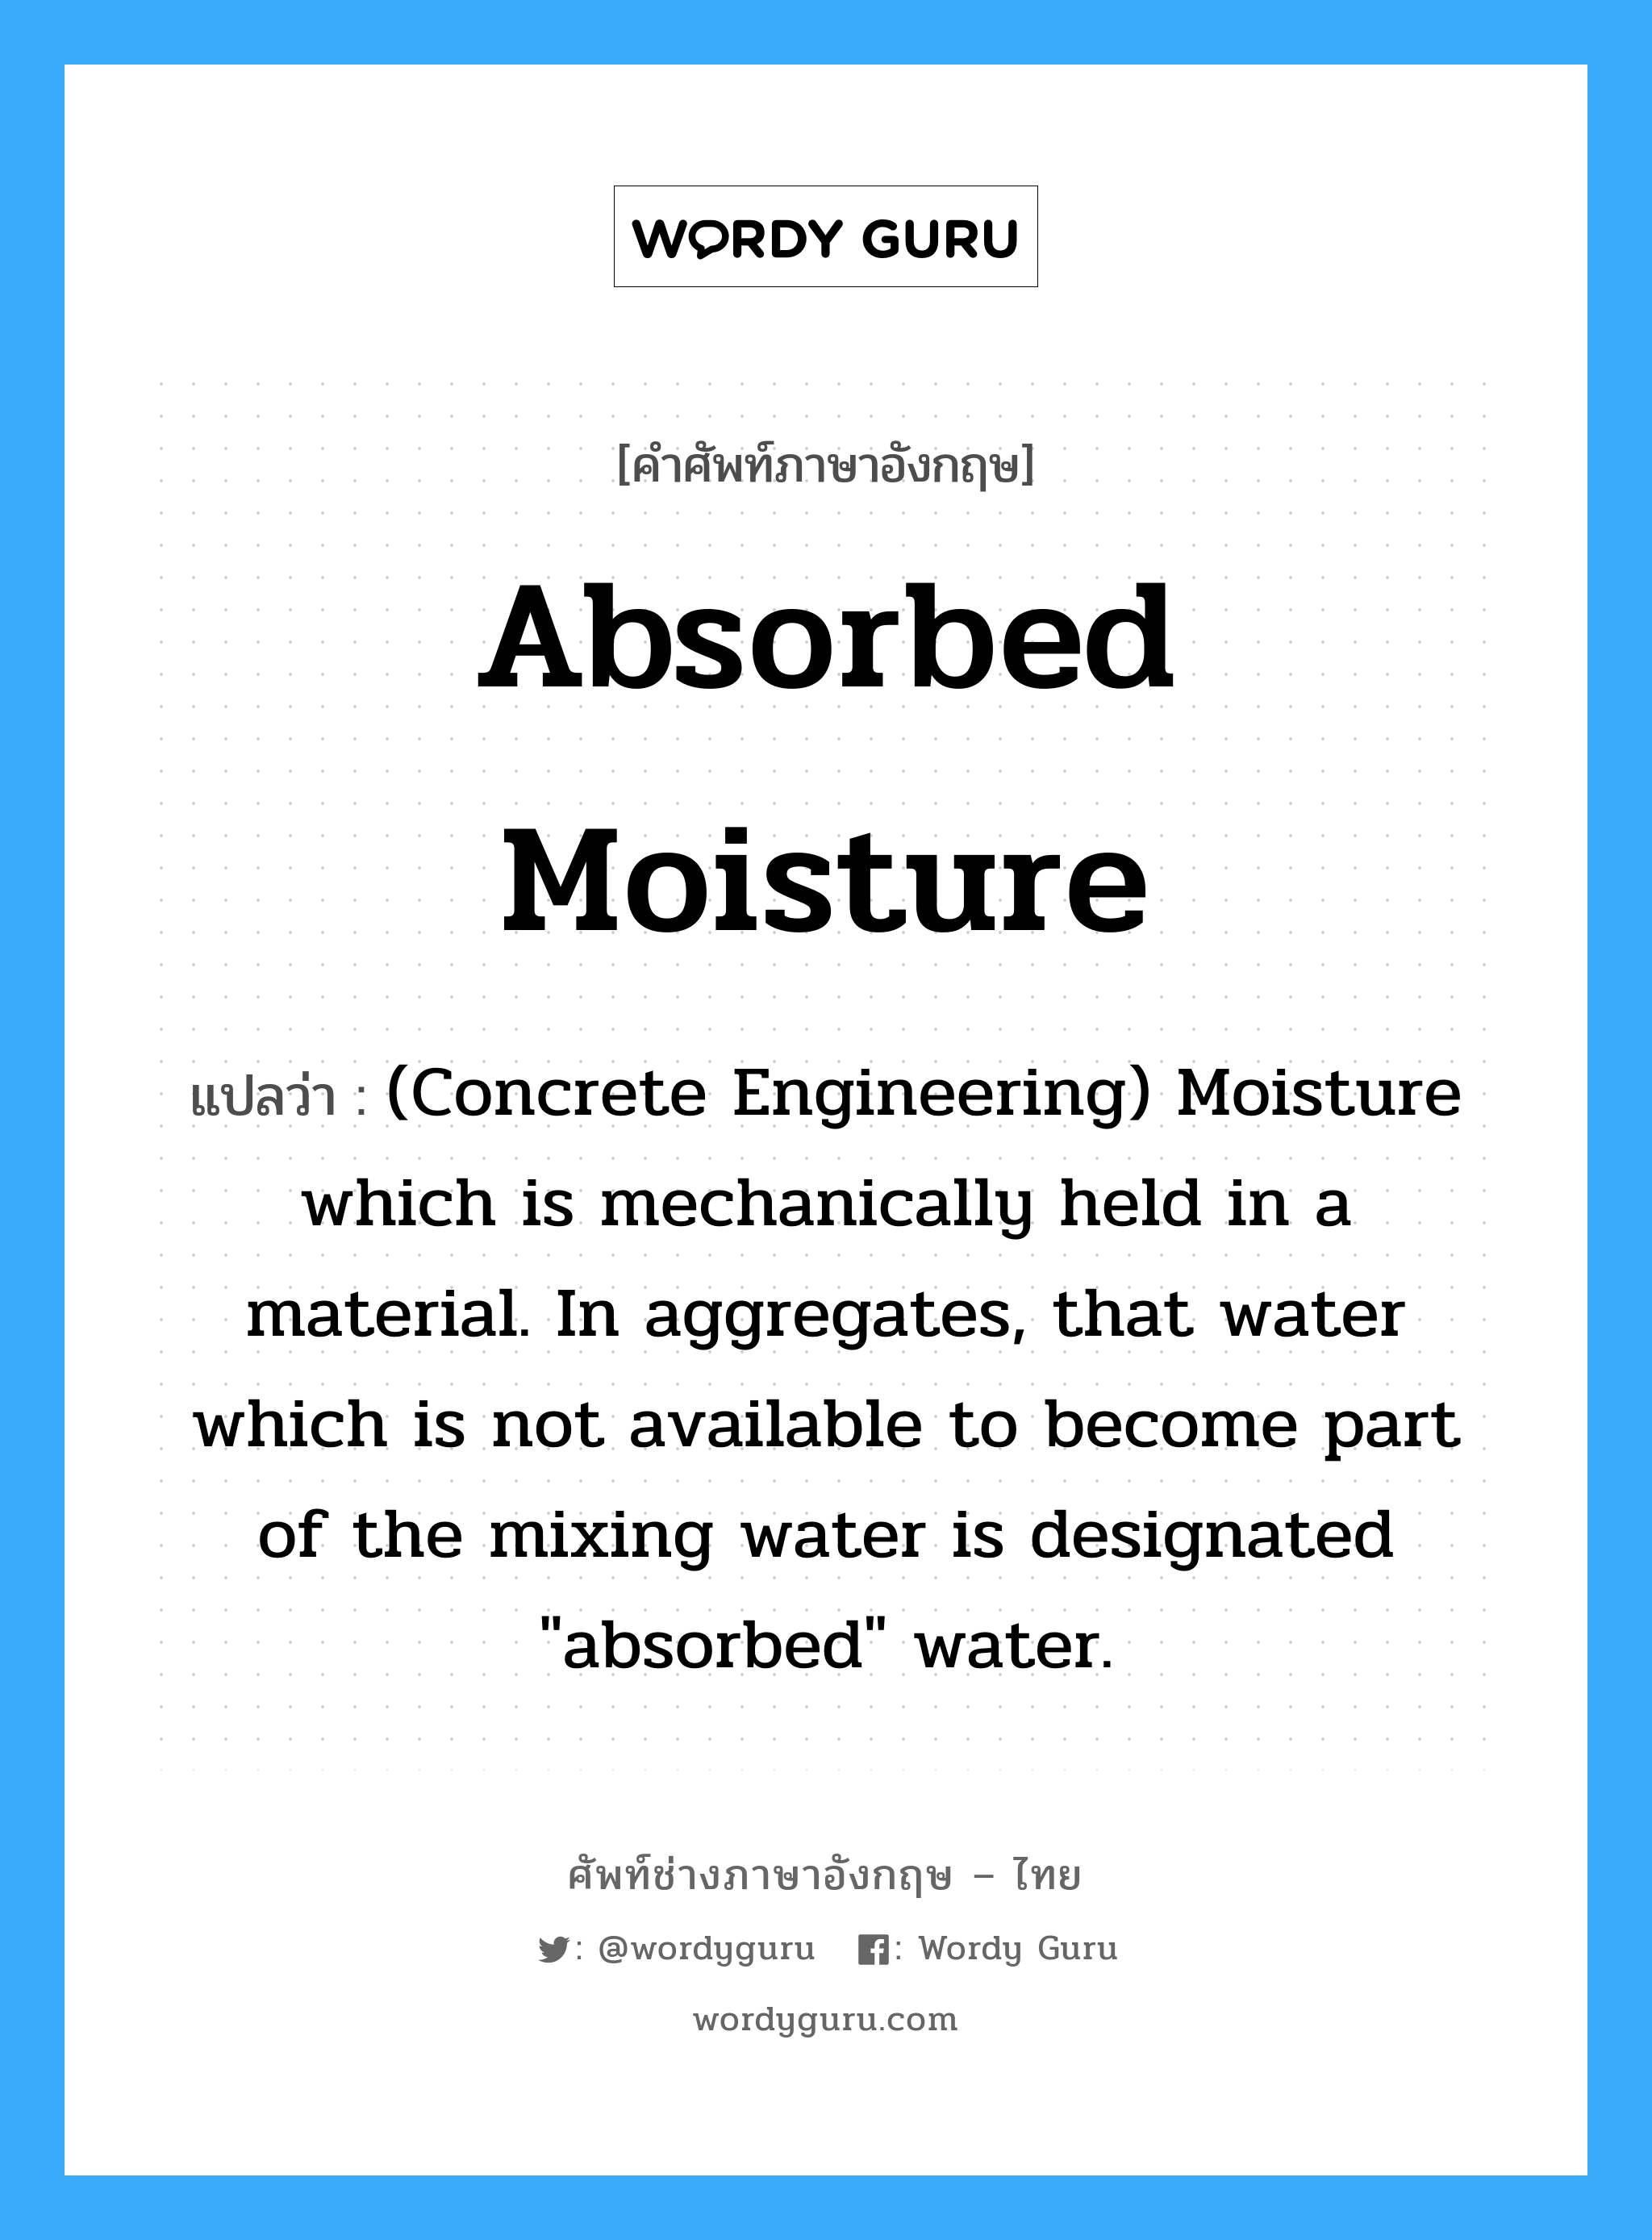 Absorbed Moisture แปลว่า?, คำศัพท์ช่างภาษาอังกฤษ - ไทย Absorbed Moisture คำศัพท์ภาษาอังกฤษ Absorbed Moisture แปลว่า (Concrete Engineering) Moisture which is mechanically held in a material. In aggregates, that water which is not available to become part of the mixing water is designated "absorbed" water.